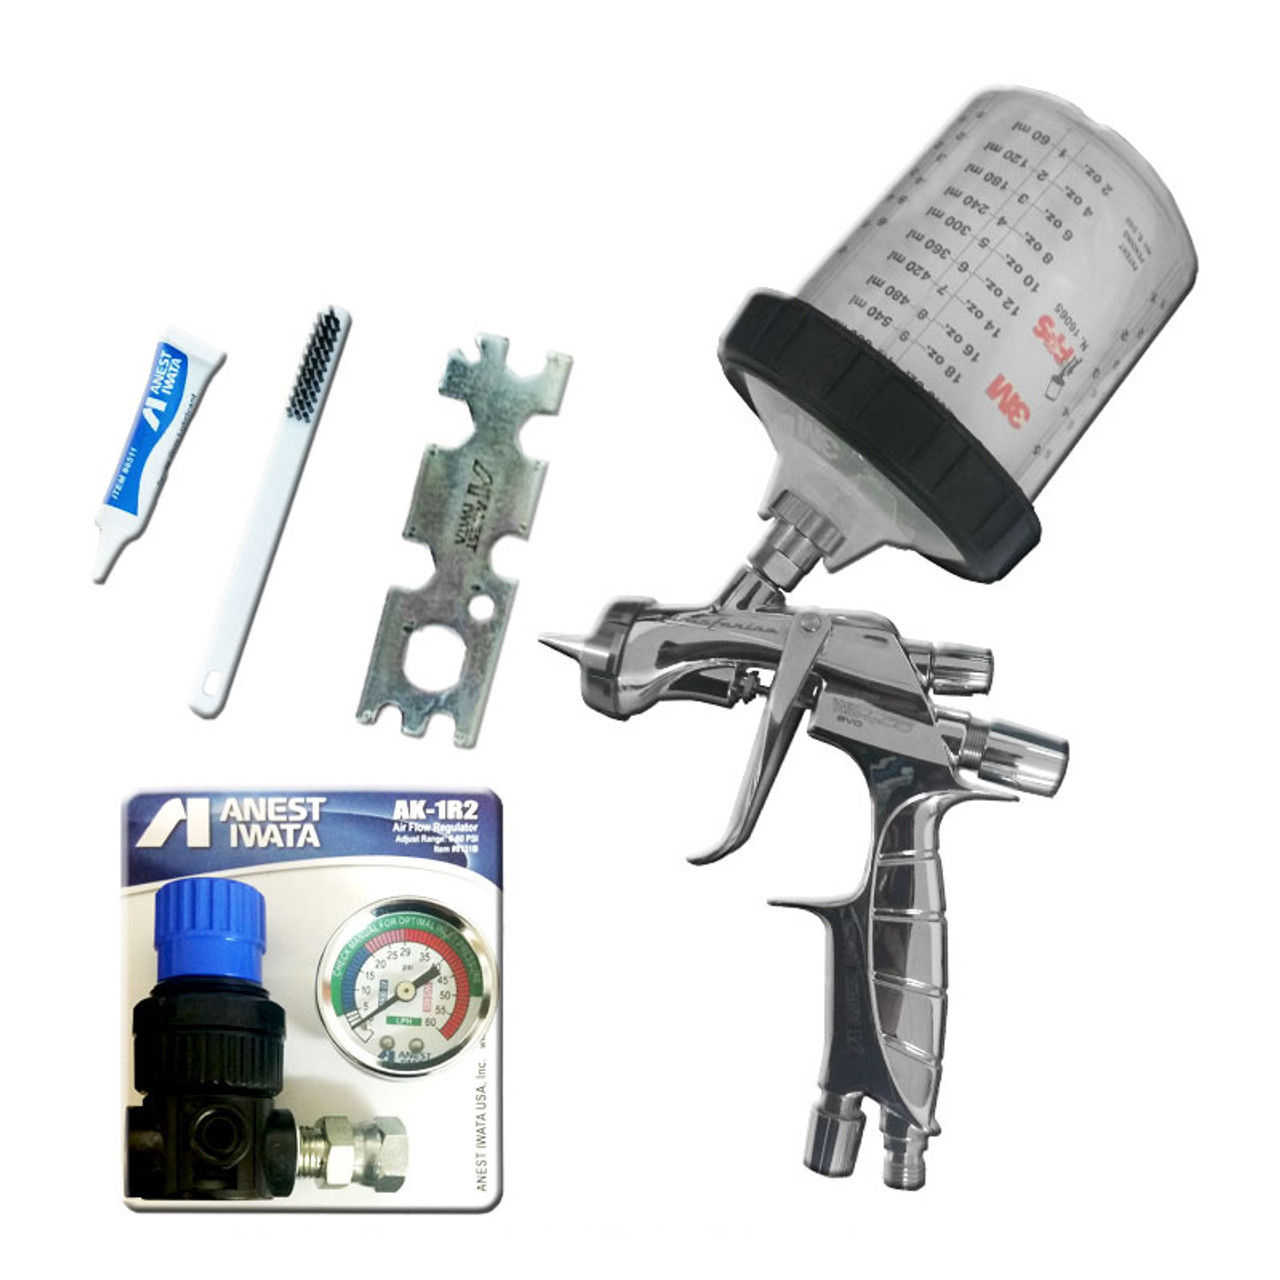 LiME LiNE 1.3 Basecoat/Clearcoat Automotive Spray Gun